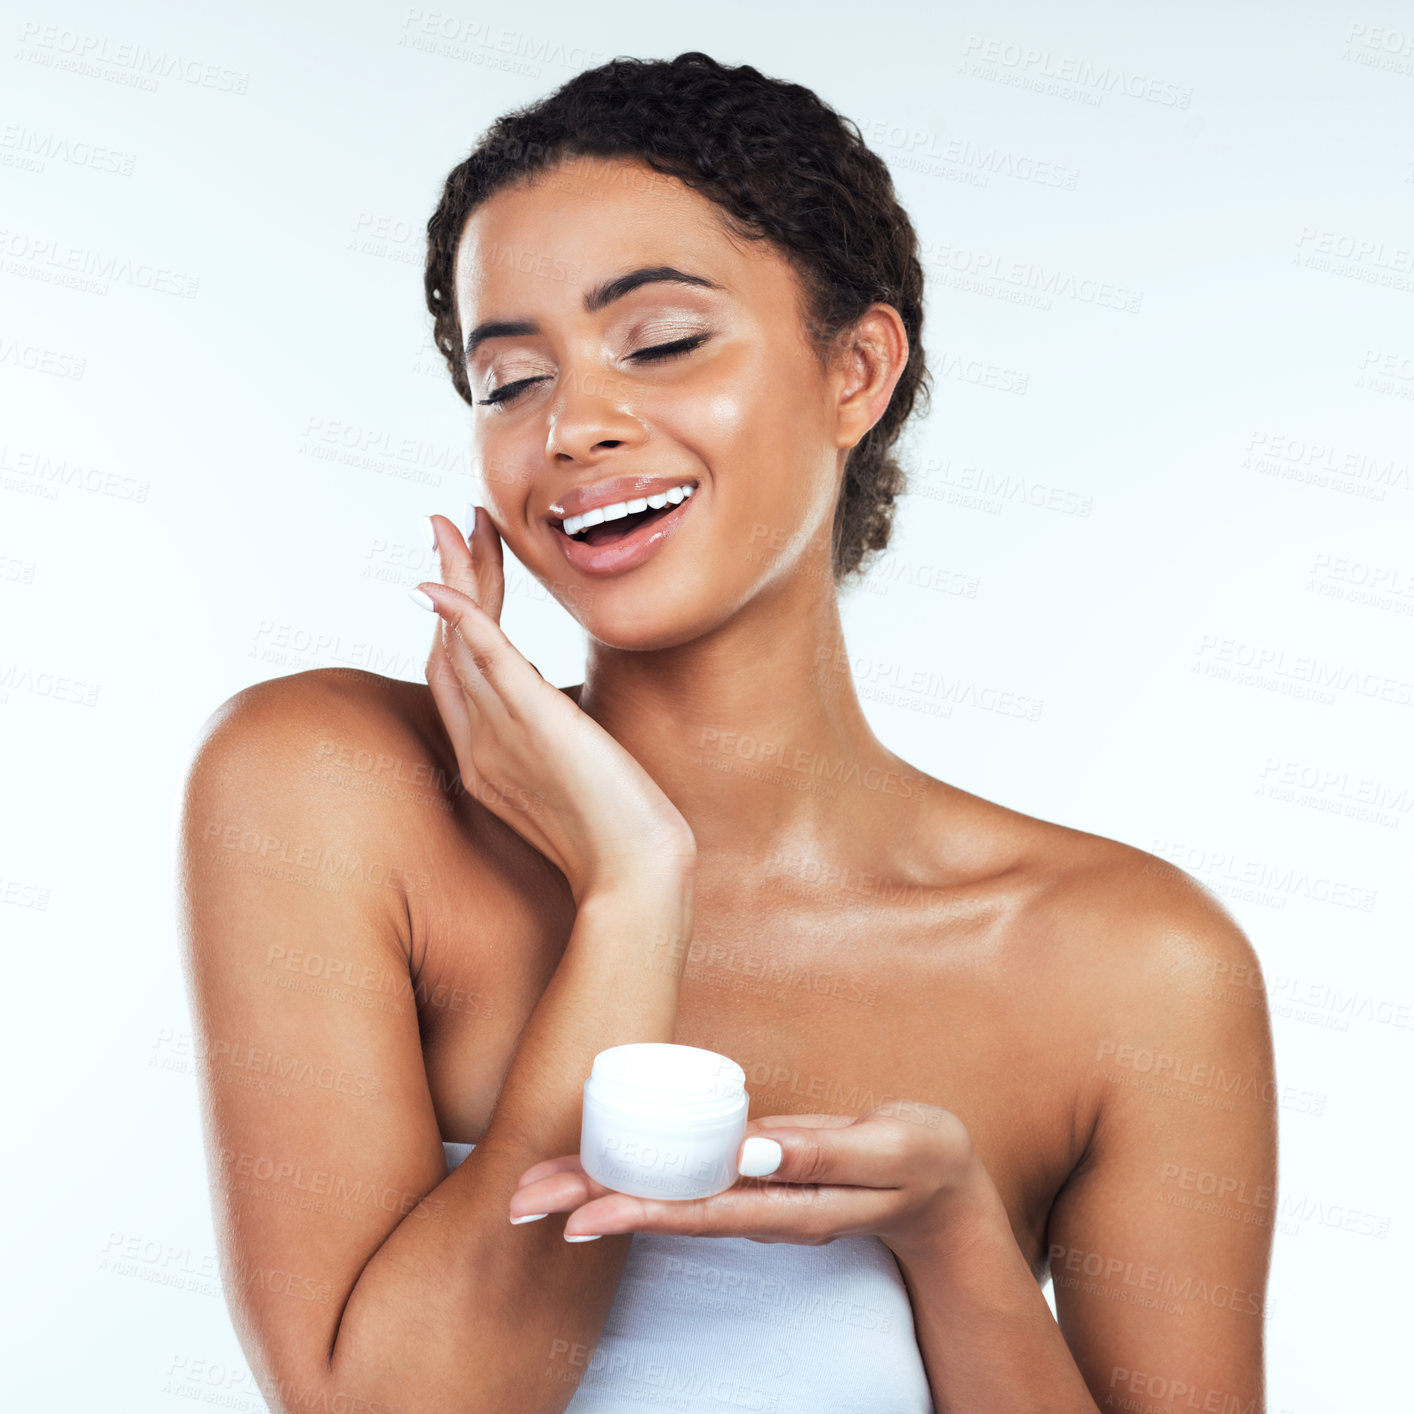 Buy stock photo Studio shot of an attractive young woman posing while applying cream to her face  against a white background